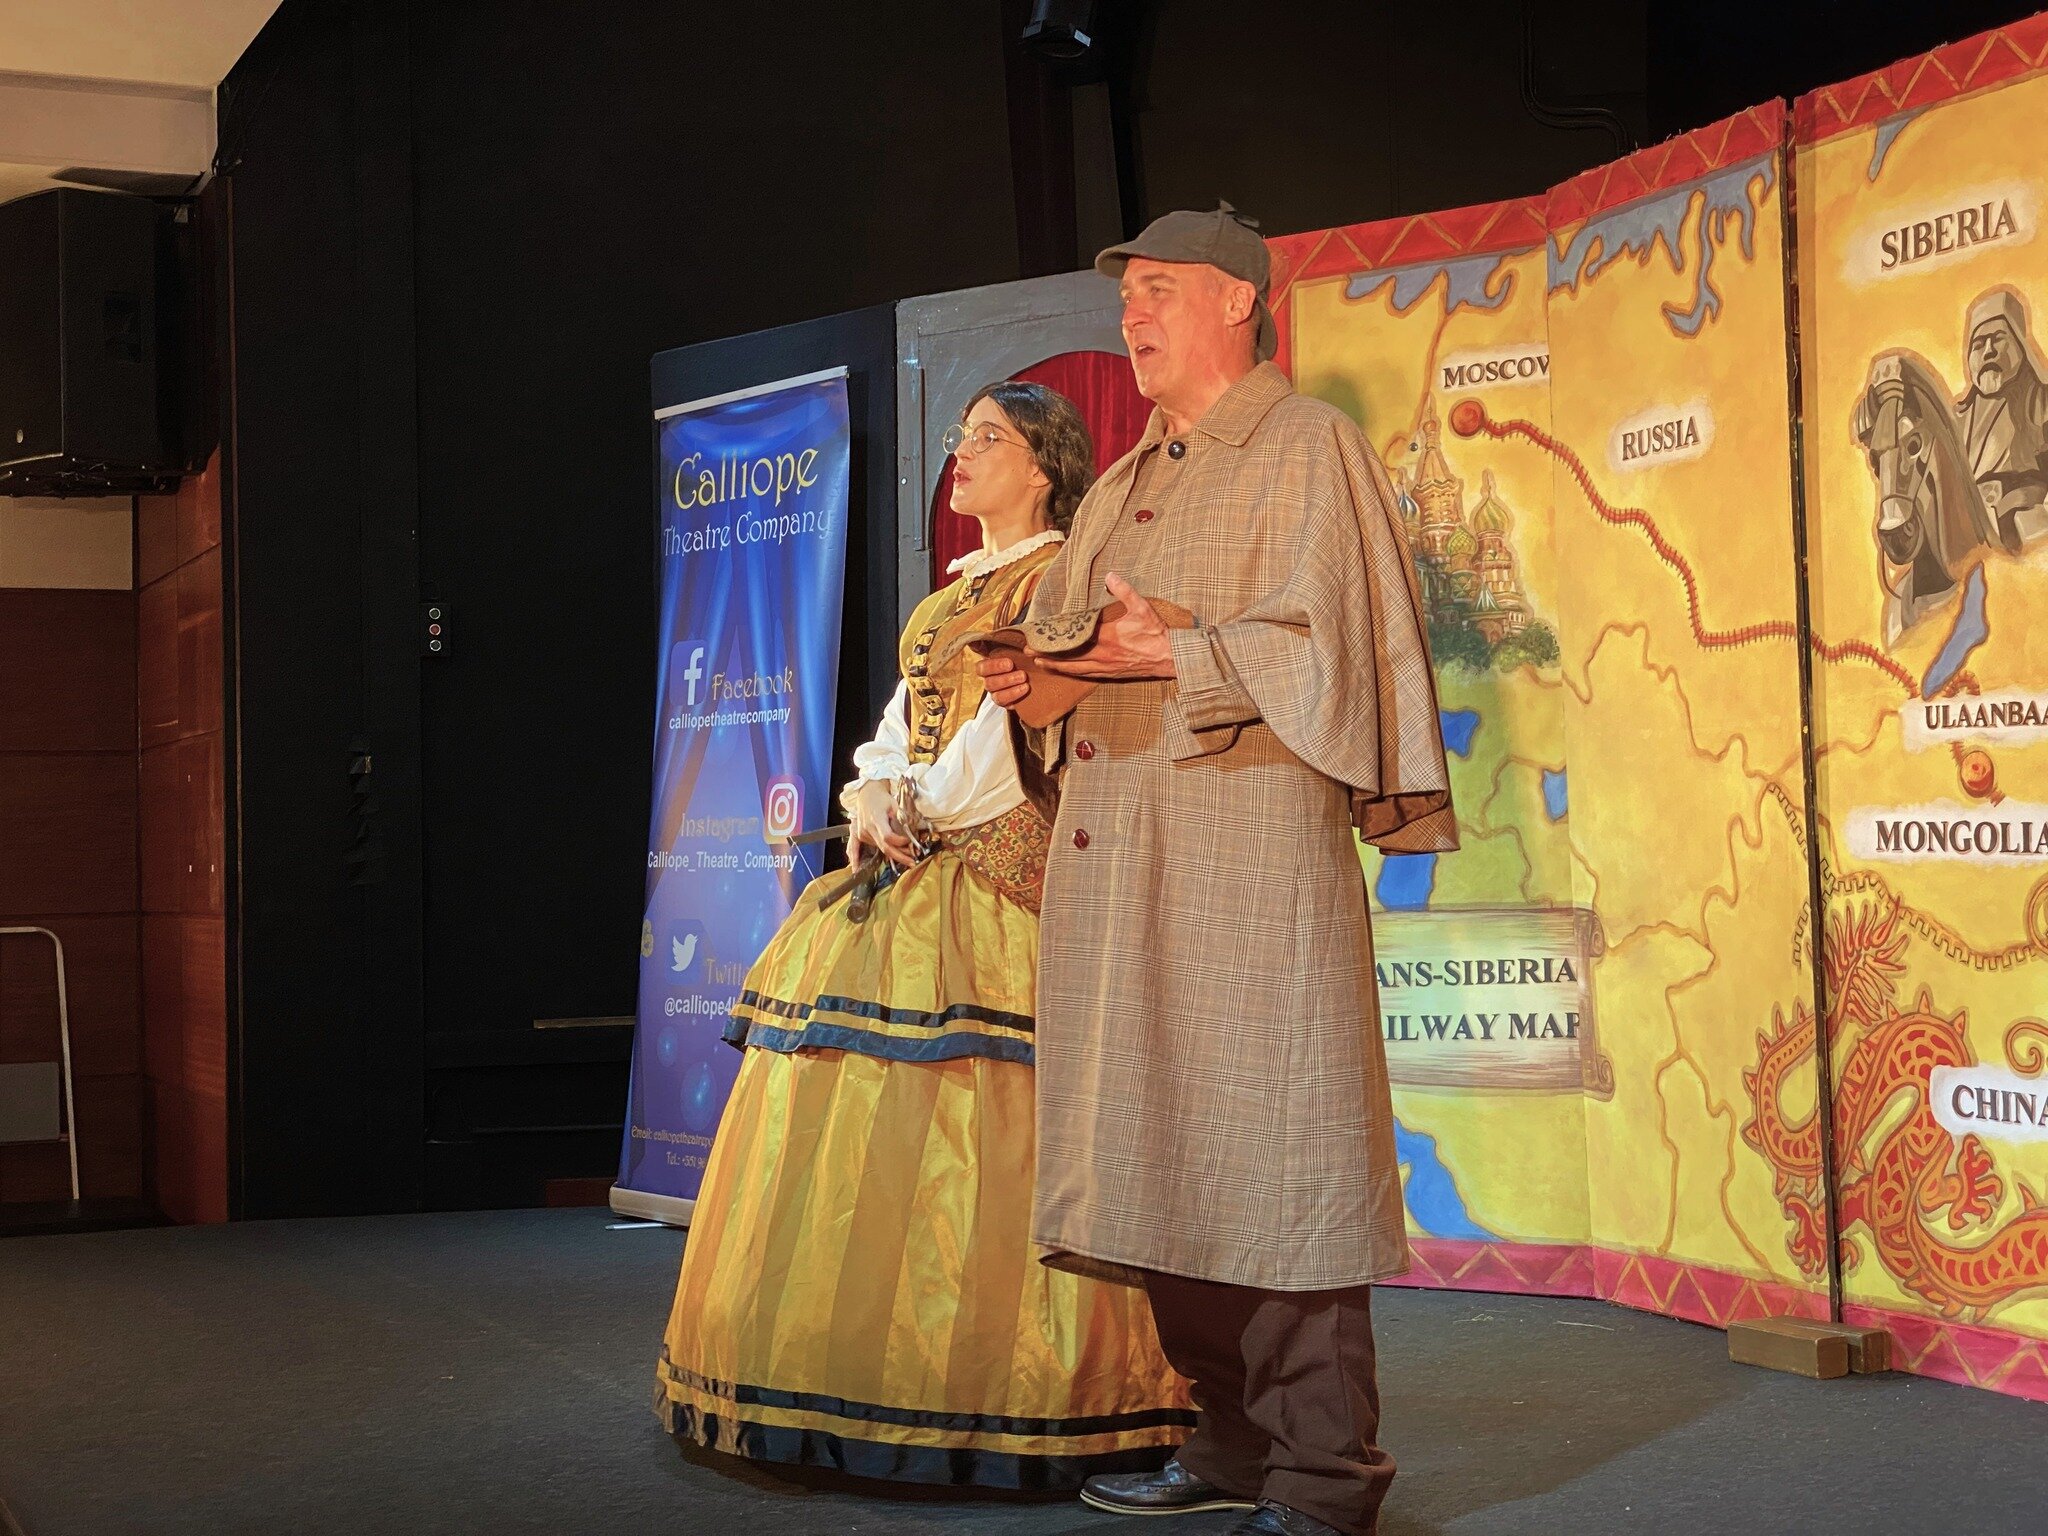 Your students help Sherlock Holmes and Jane Watson discover the clues to solve the mystery in Sherlock Holmes and the Railway Riddle!

 #educationaltheatre #childrenstheater #theatre #musicaltheater #childrenstheatre #educationaltheater #teatroeducat